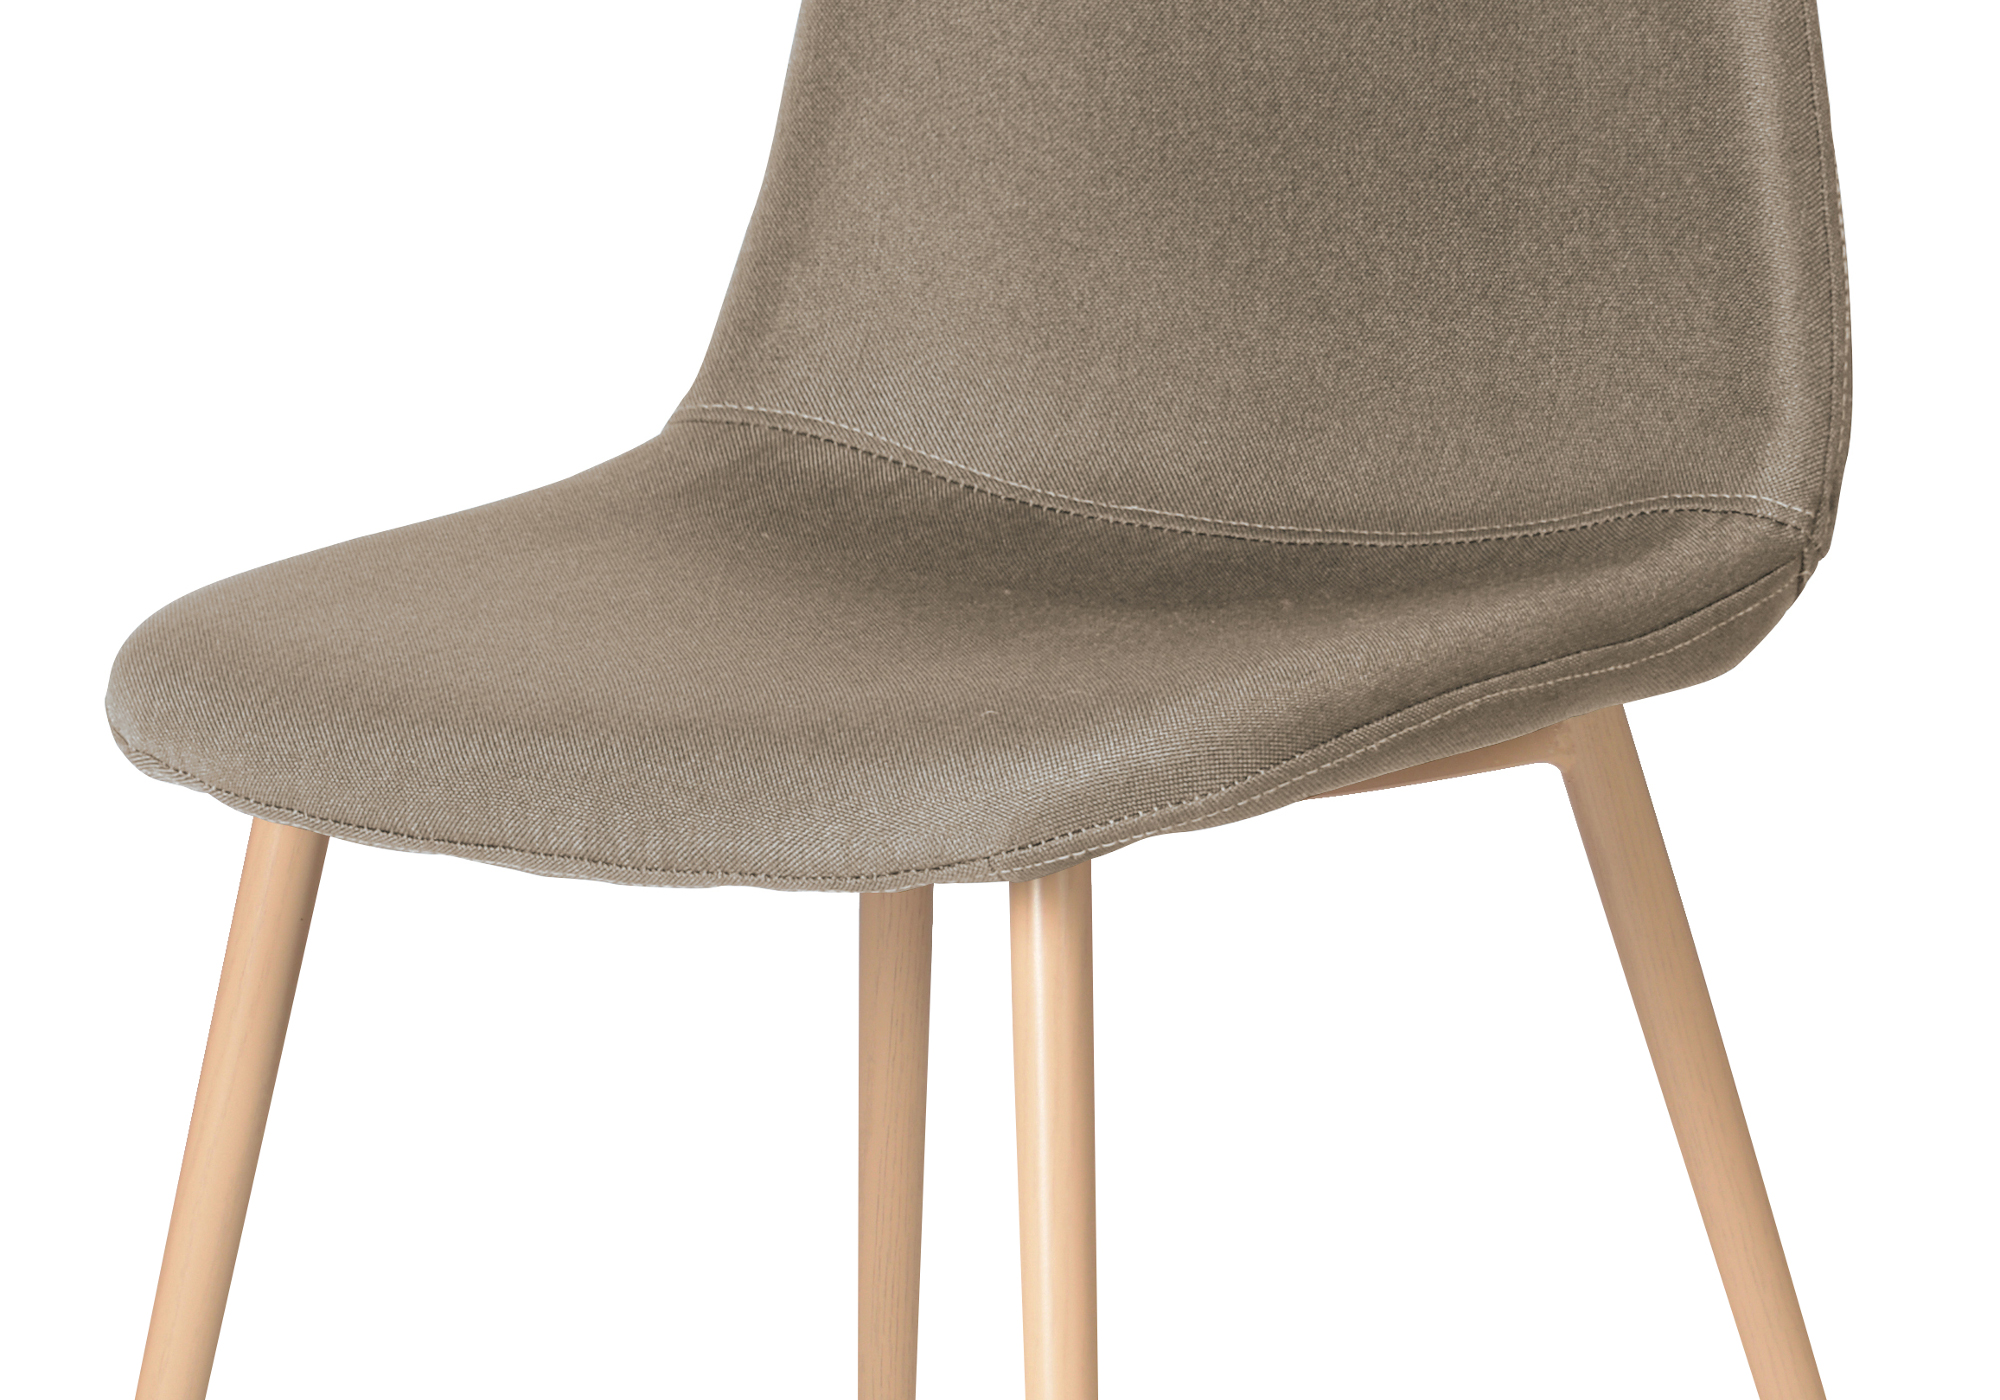 Chaises scandinave tissu taupe LOA – Table/Chaise Design Pas Cher